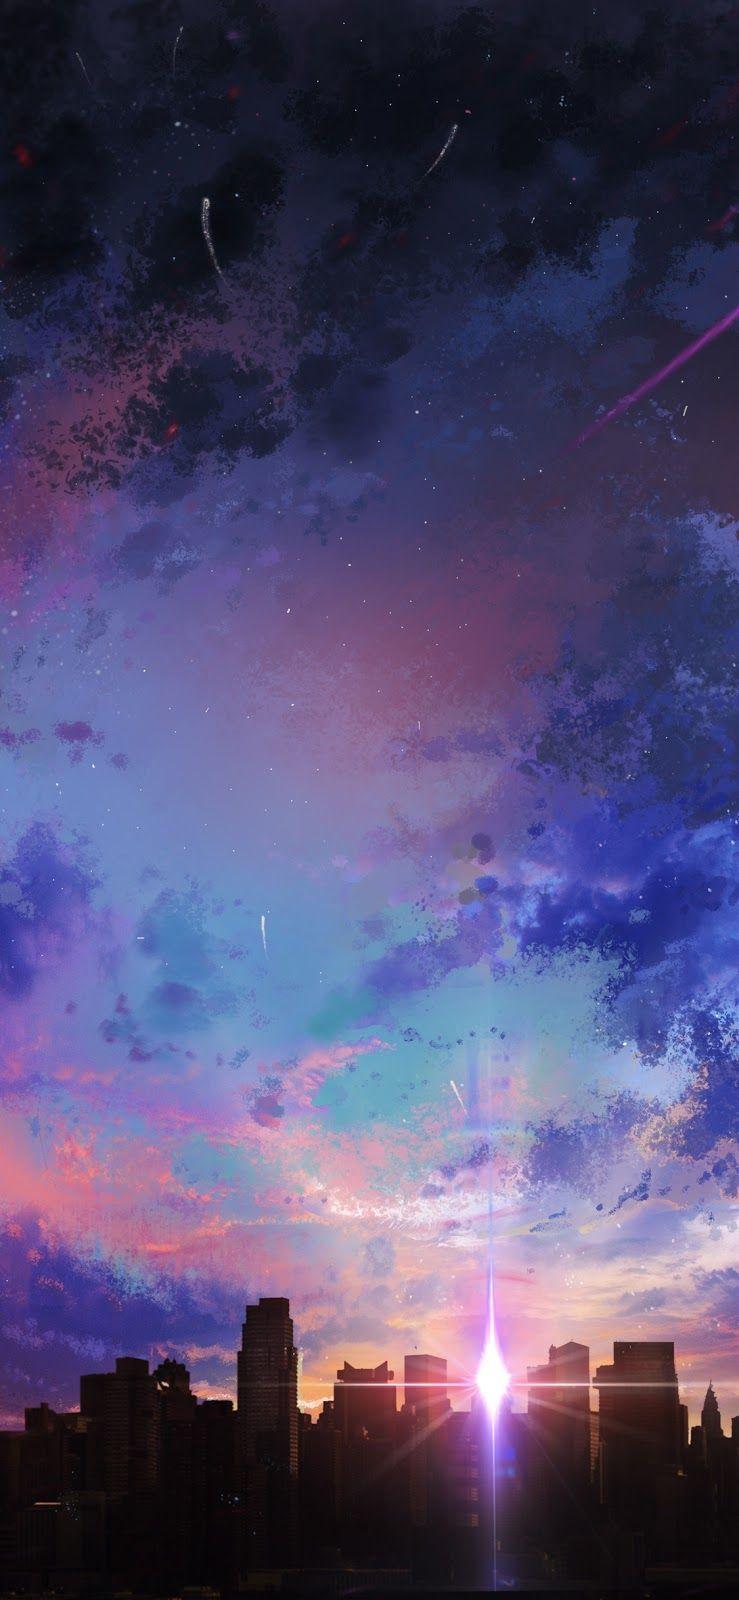 Anime Sunset Iphone Wallpapers - Top Free Anime Sunset Iphone